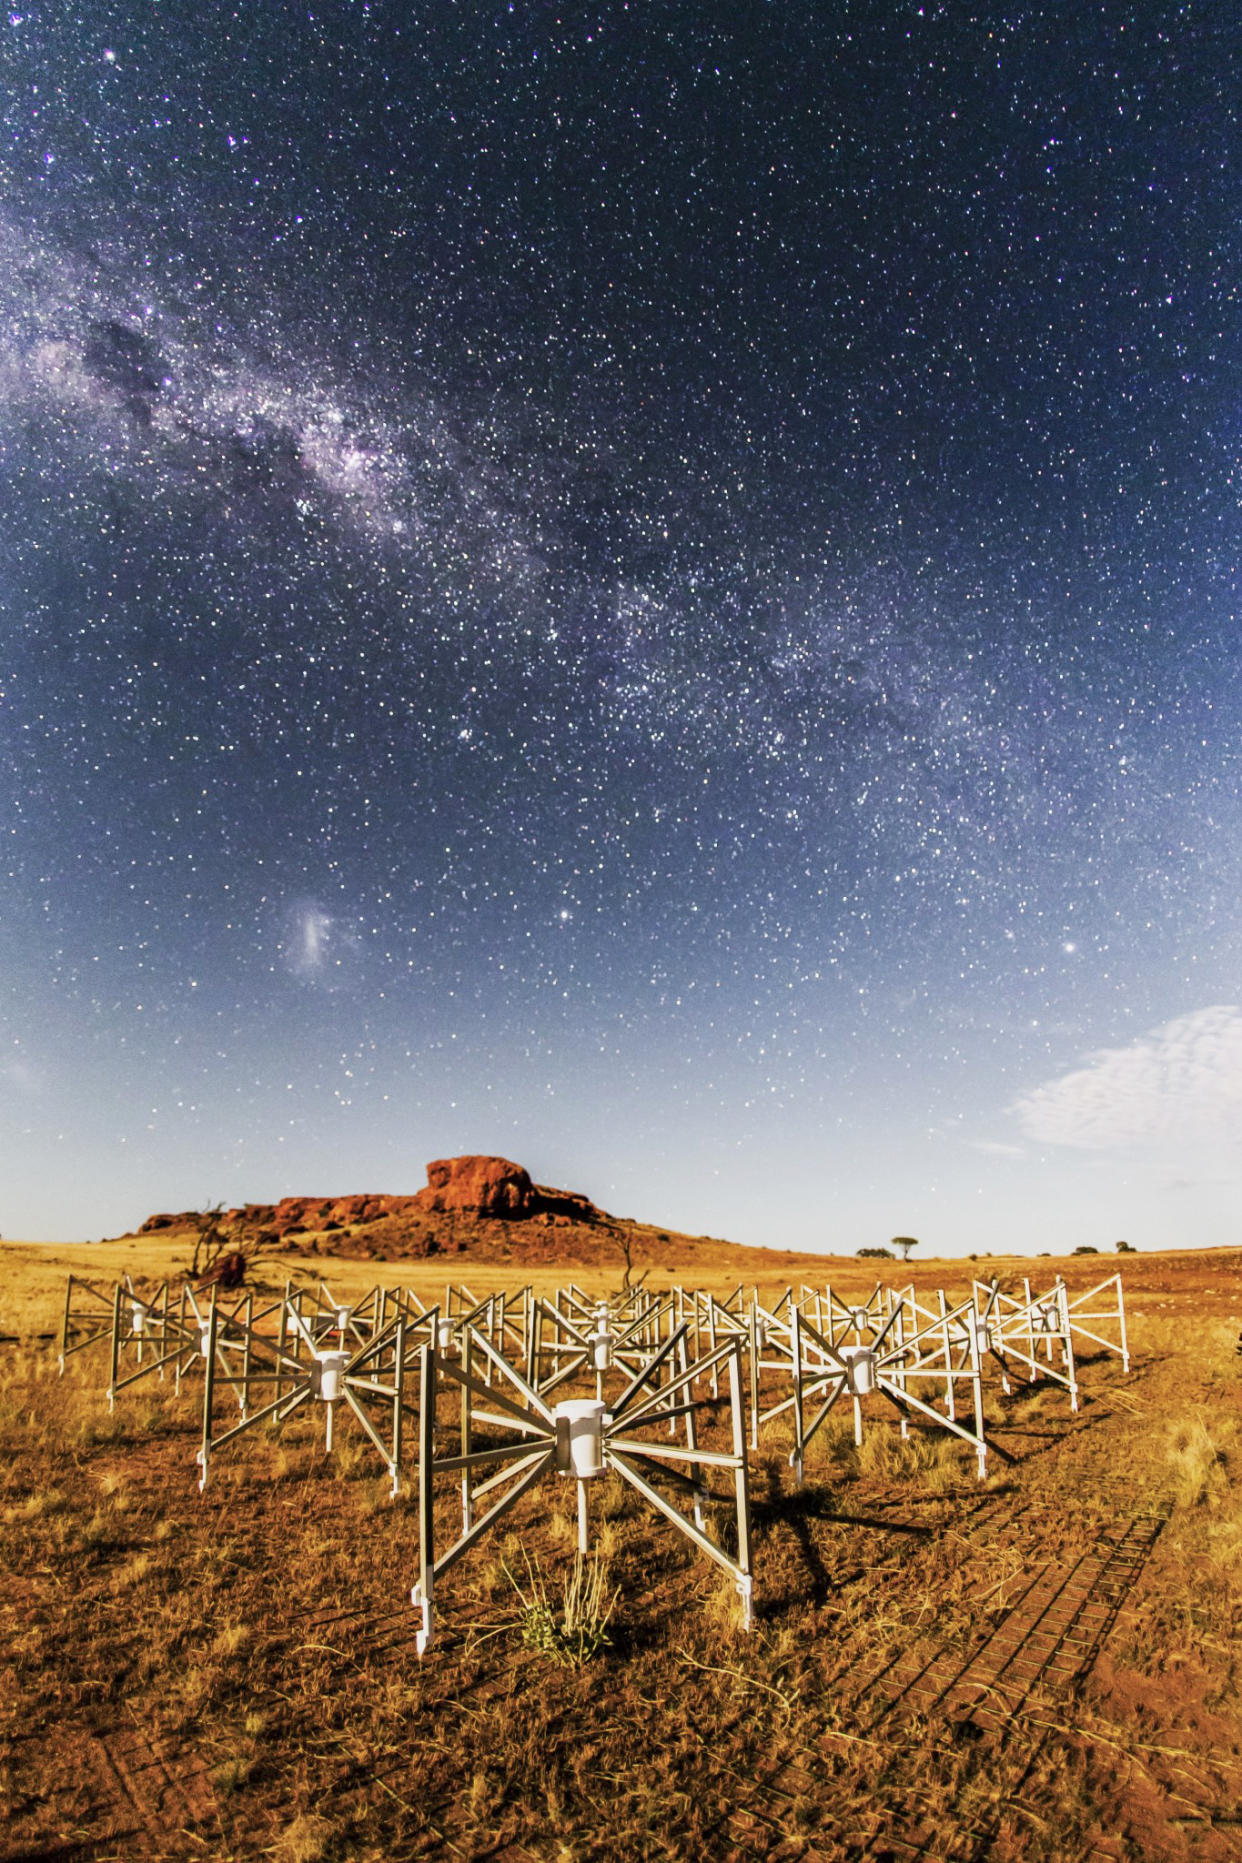 Part of the Murchison Widefield Array telescope, located in the Western Australia outback. (Pete Wheeler / ICRAR)